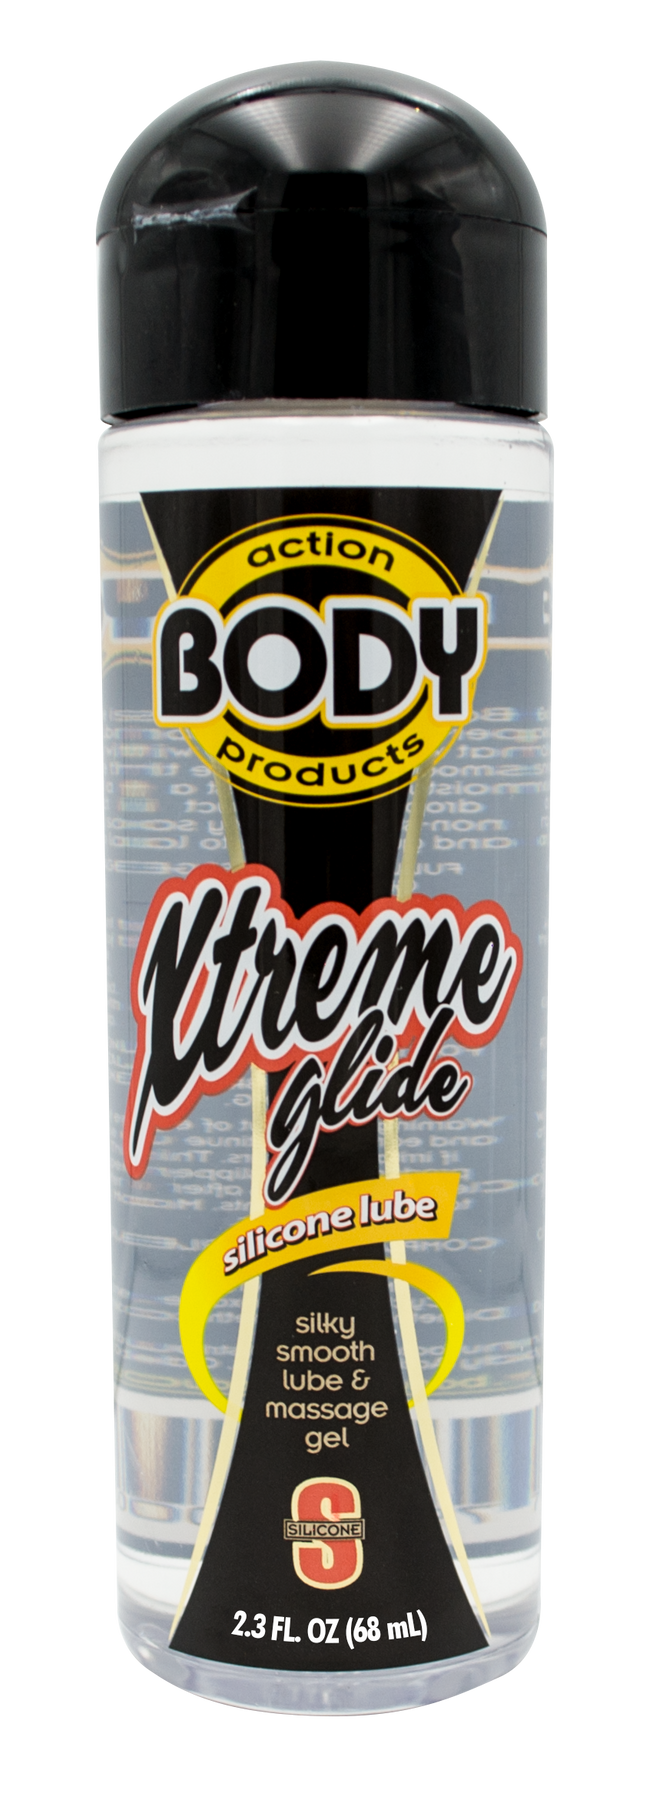 Body Action Extreme Glide 2.3 Oz